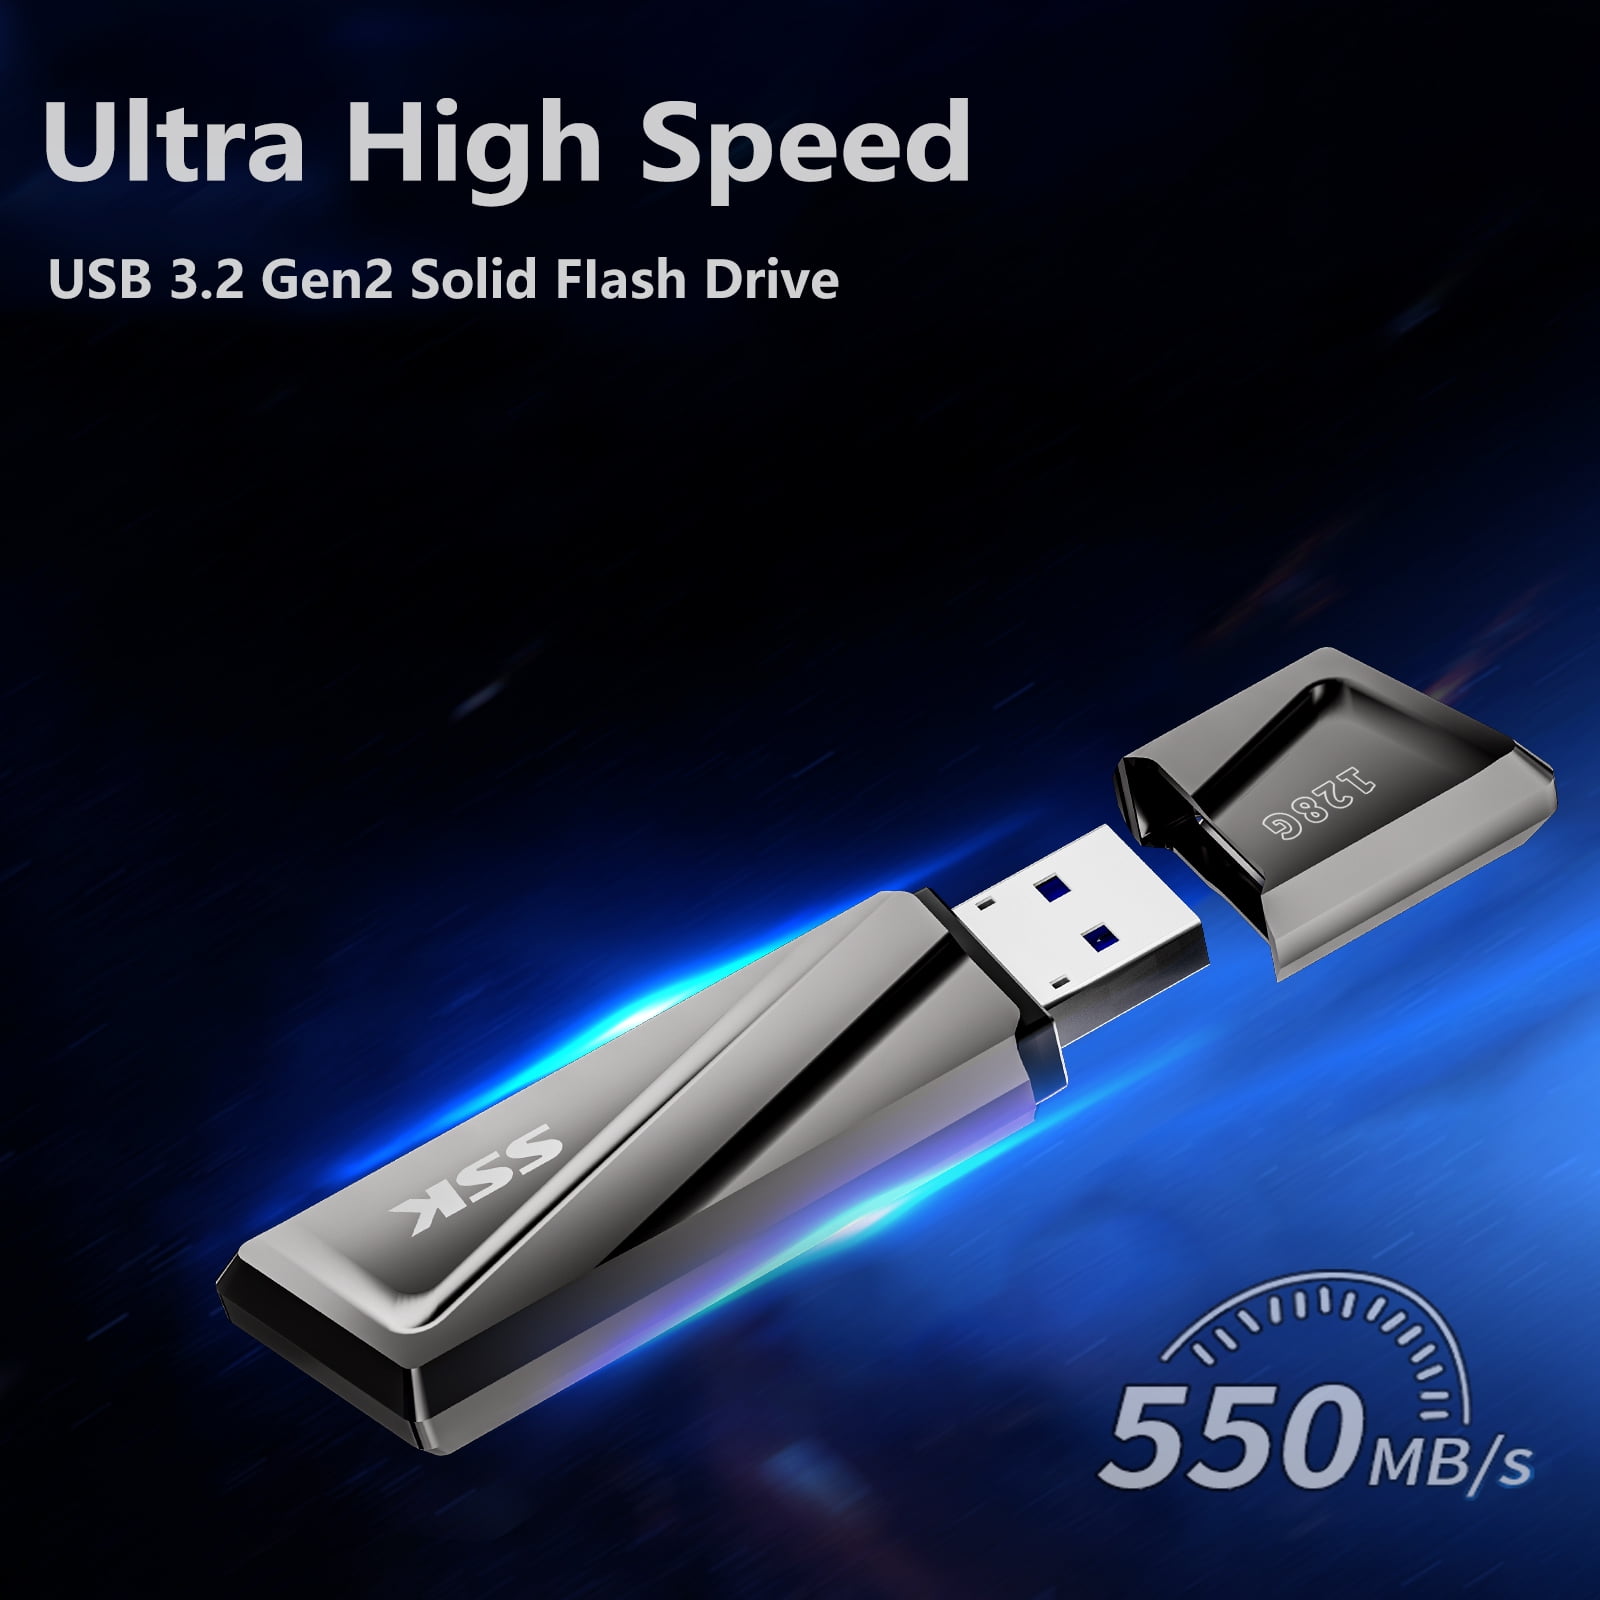 SSK 256GB USB SSD Solid State Flash Drive 550MB/s Super-Fast Transfer Speed  USB 3.2 Gen2 Thumb(Jump) Drive Memory Stick + USB C Adapter for Type-c  Smartphone, Laptop, MacBook/Pro/Air and More 